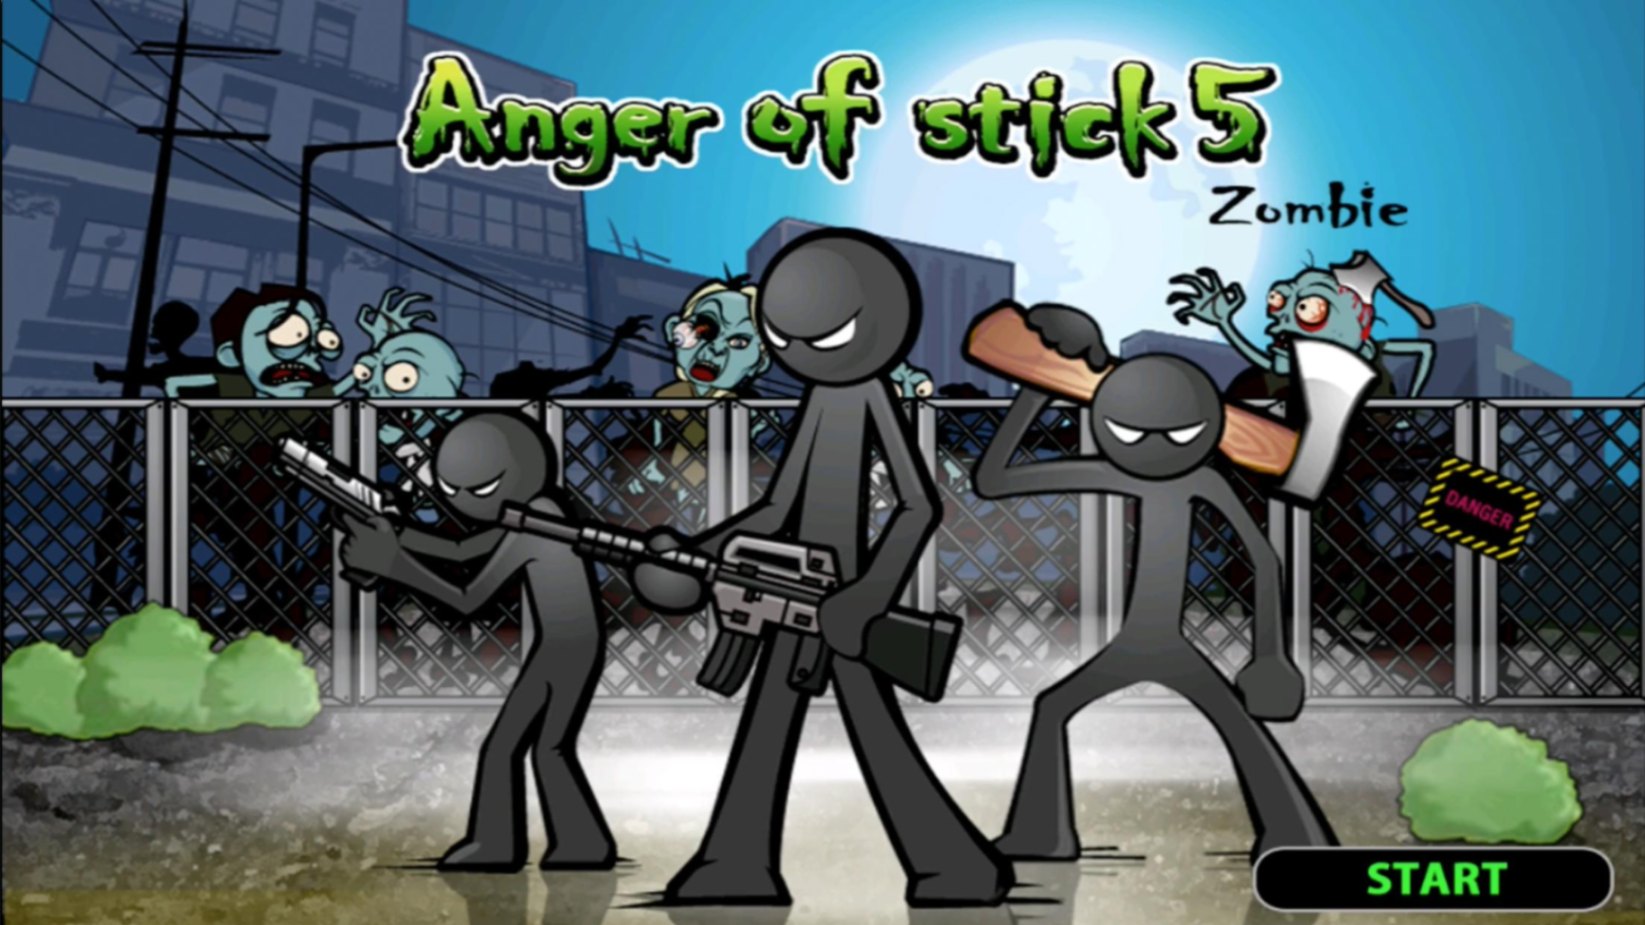 How to Download the Game Anger of Stick 5